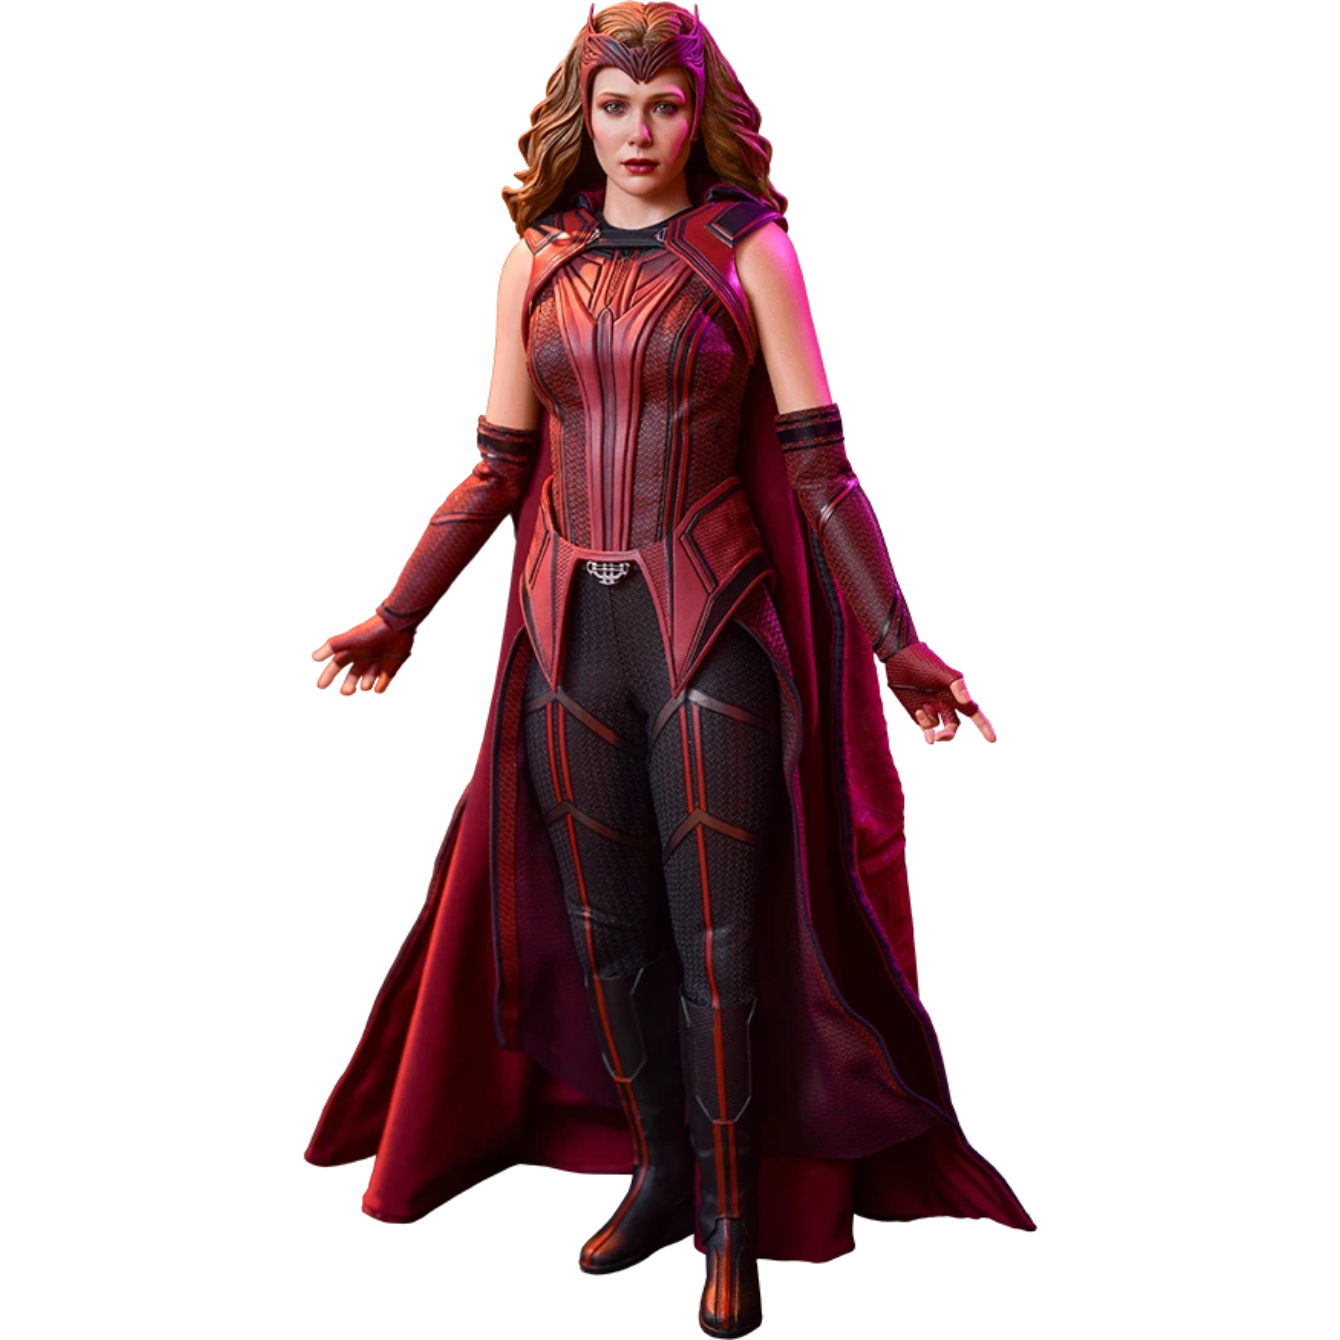 THE SCARLET WITCH Sixth Scale Figure by Hot Toys